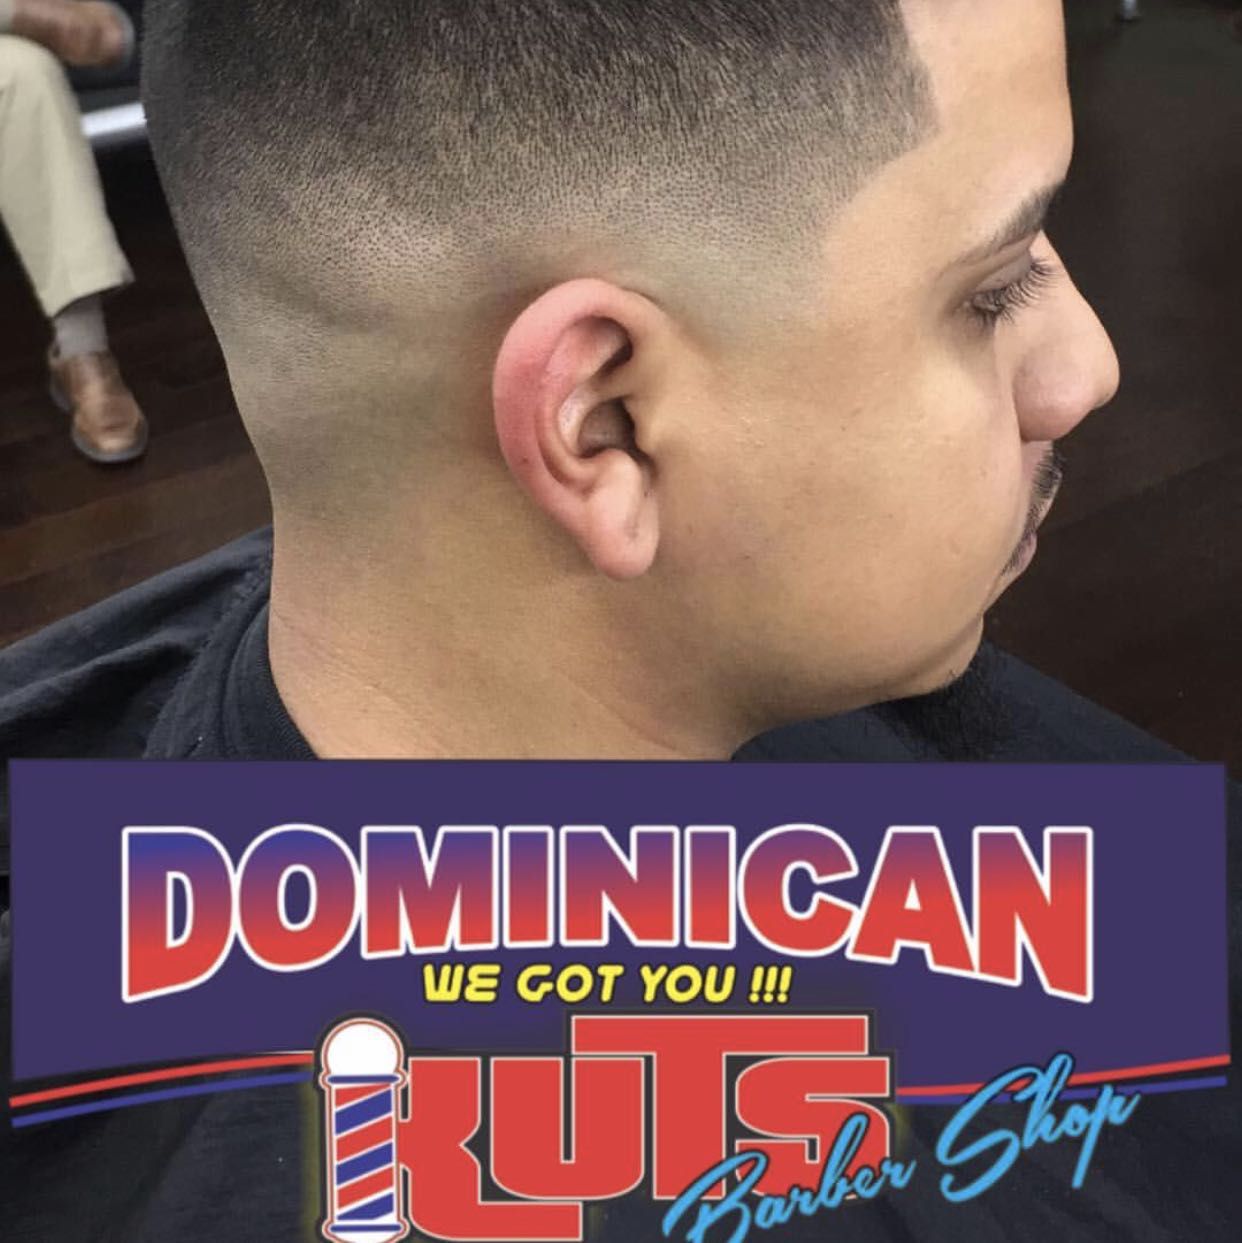 Dominicankuts, 2585 Cruse Rd NW, Lawrenceville, 30044